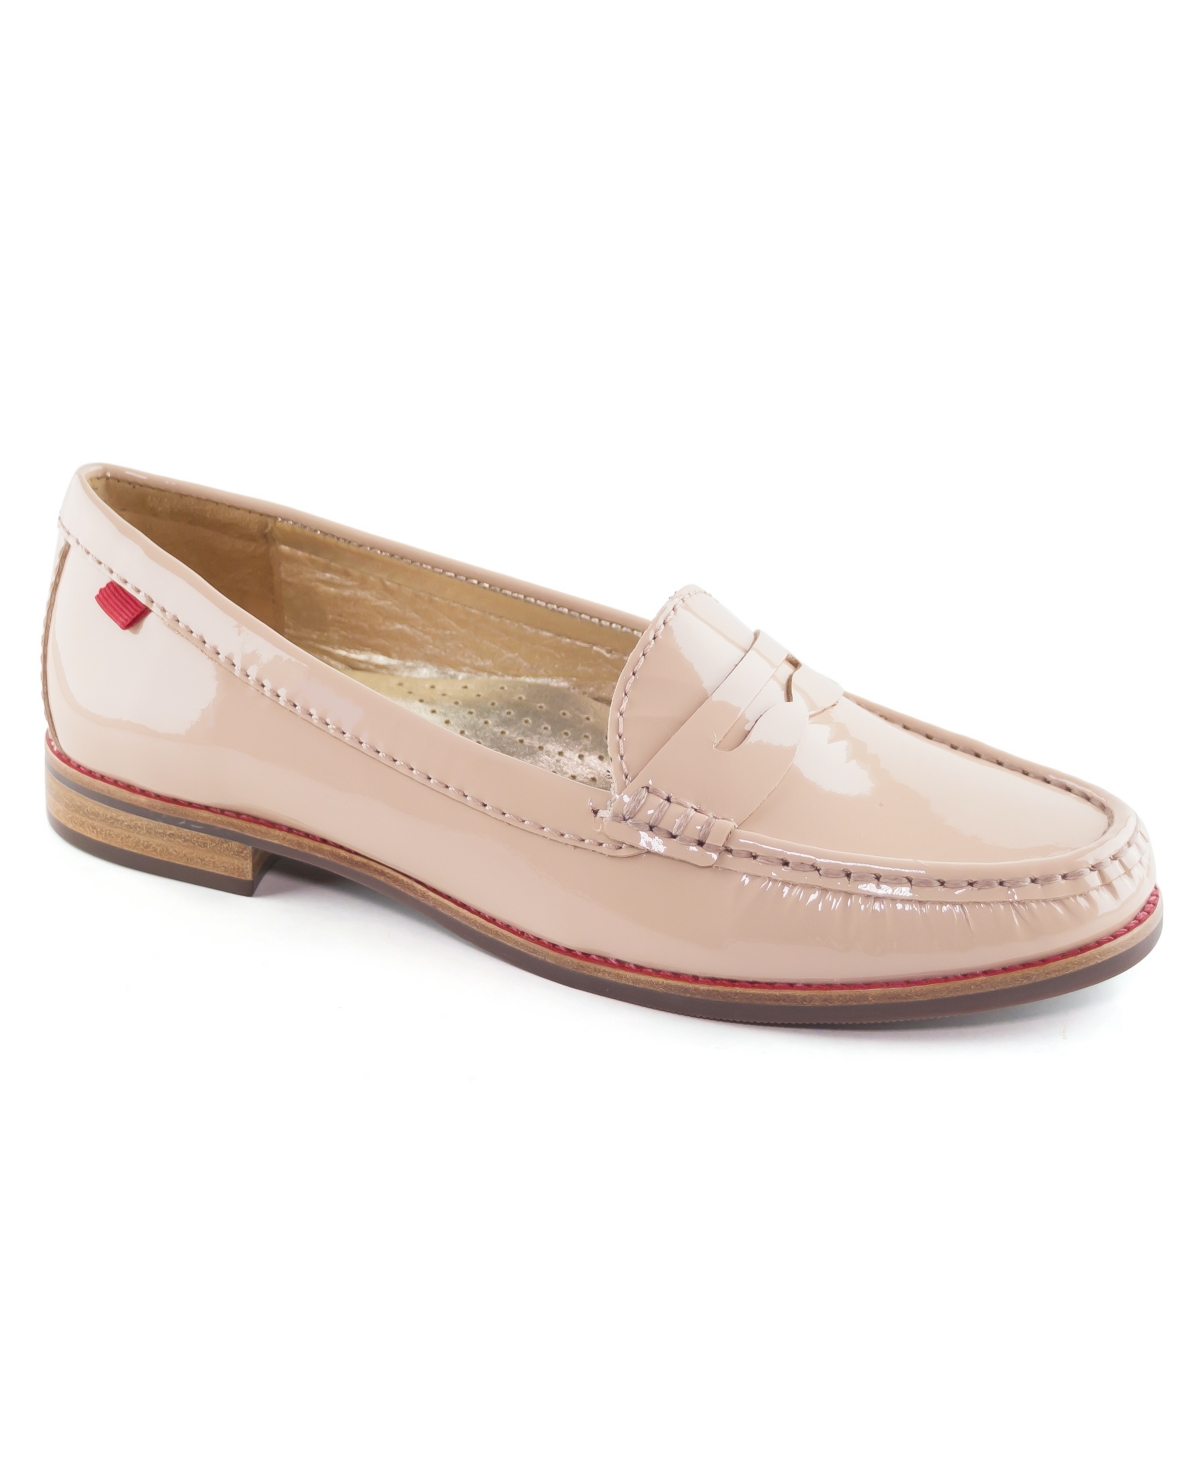 Women's East Village Loafers - Nude Patent